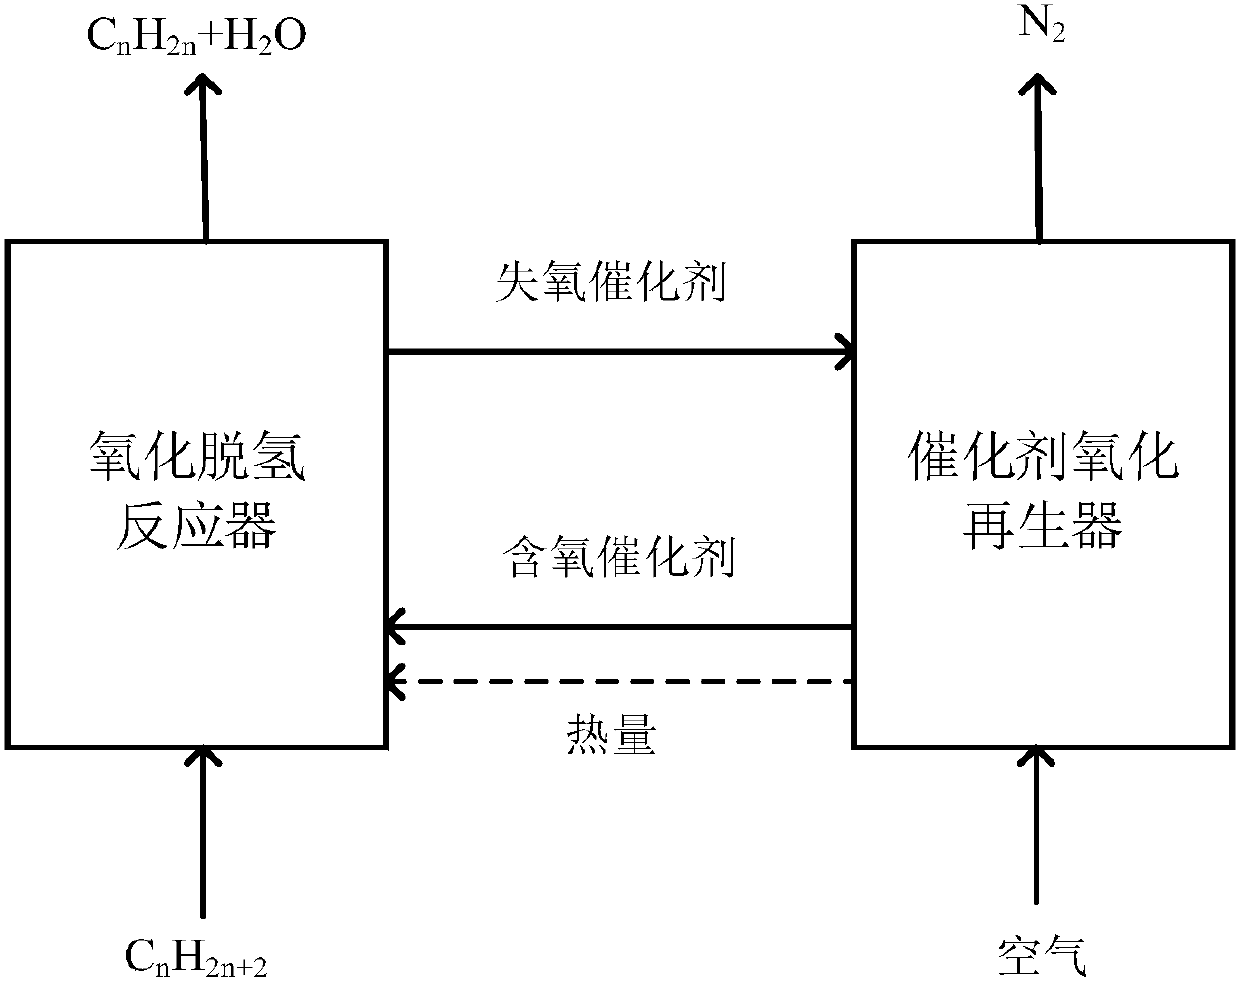 Low-carbon alkane chemical chain oxydehydrogenation to olefin technology